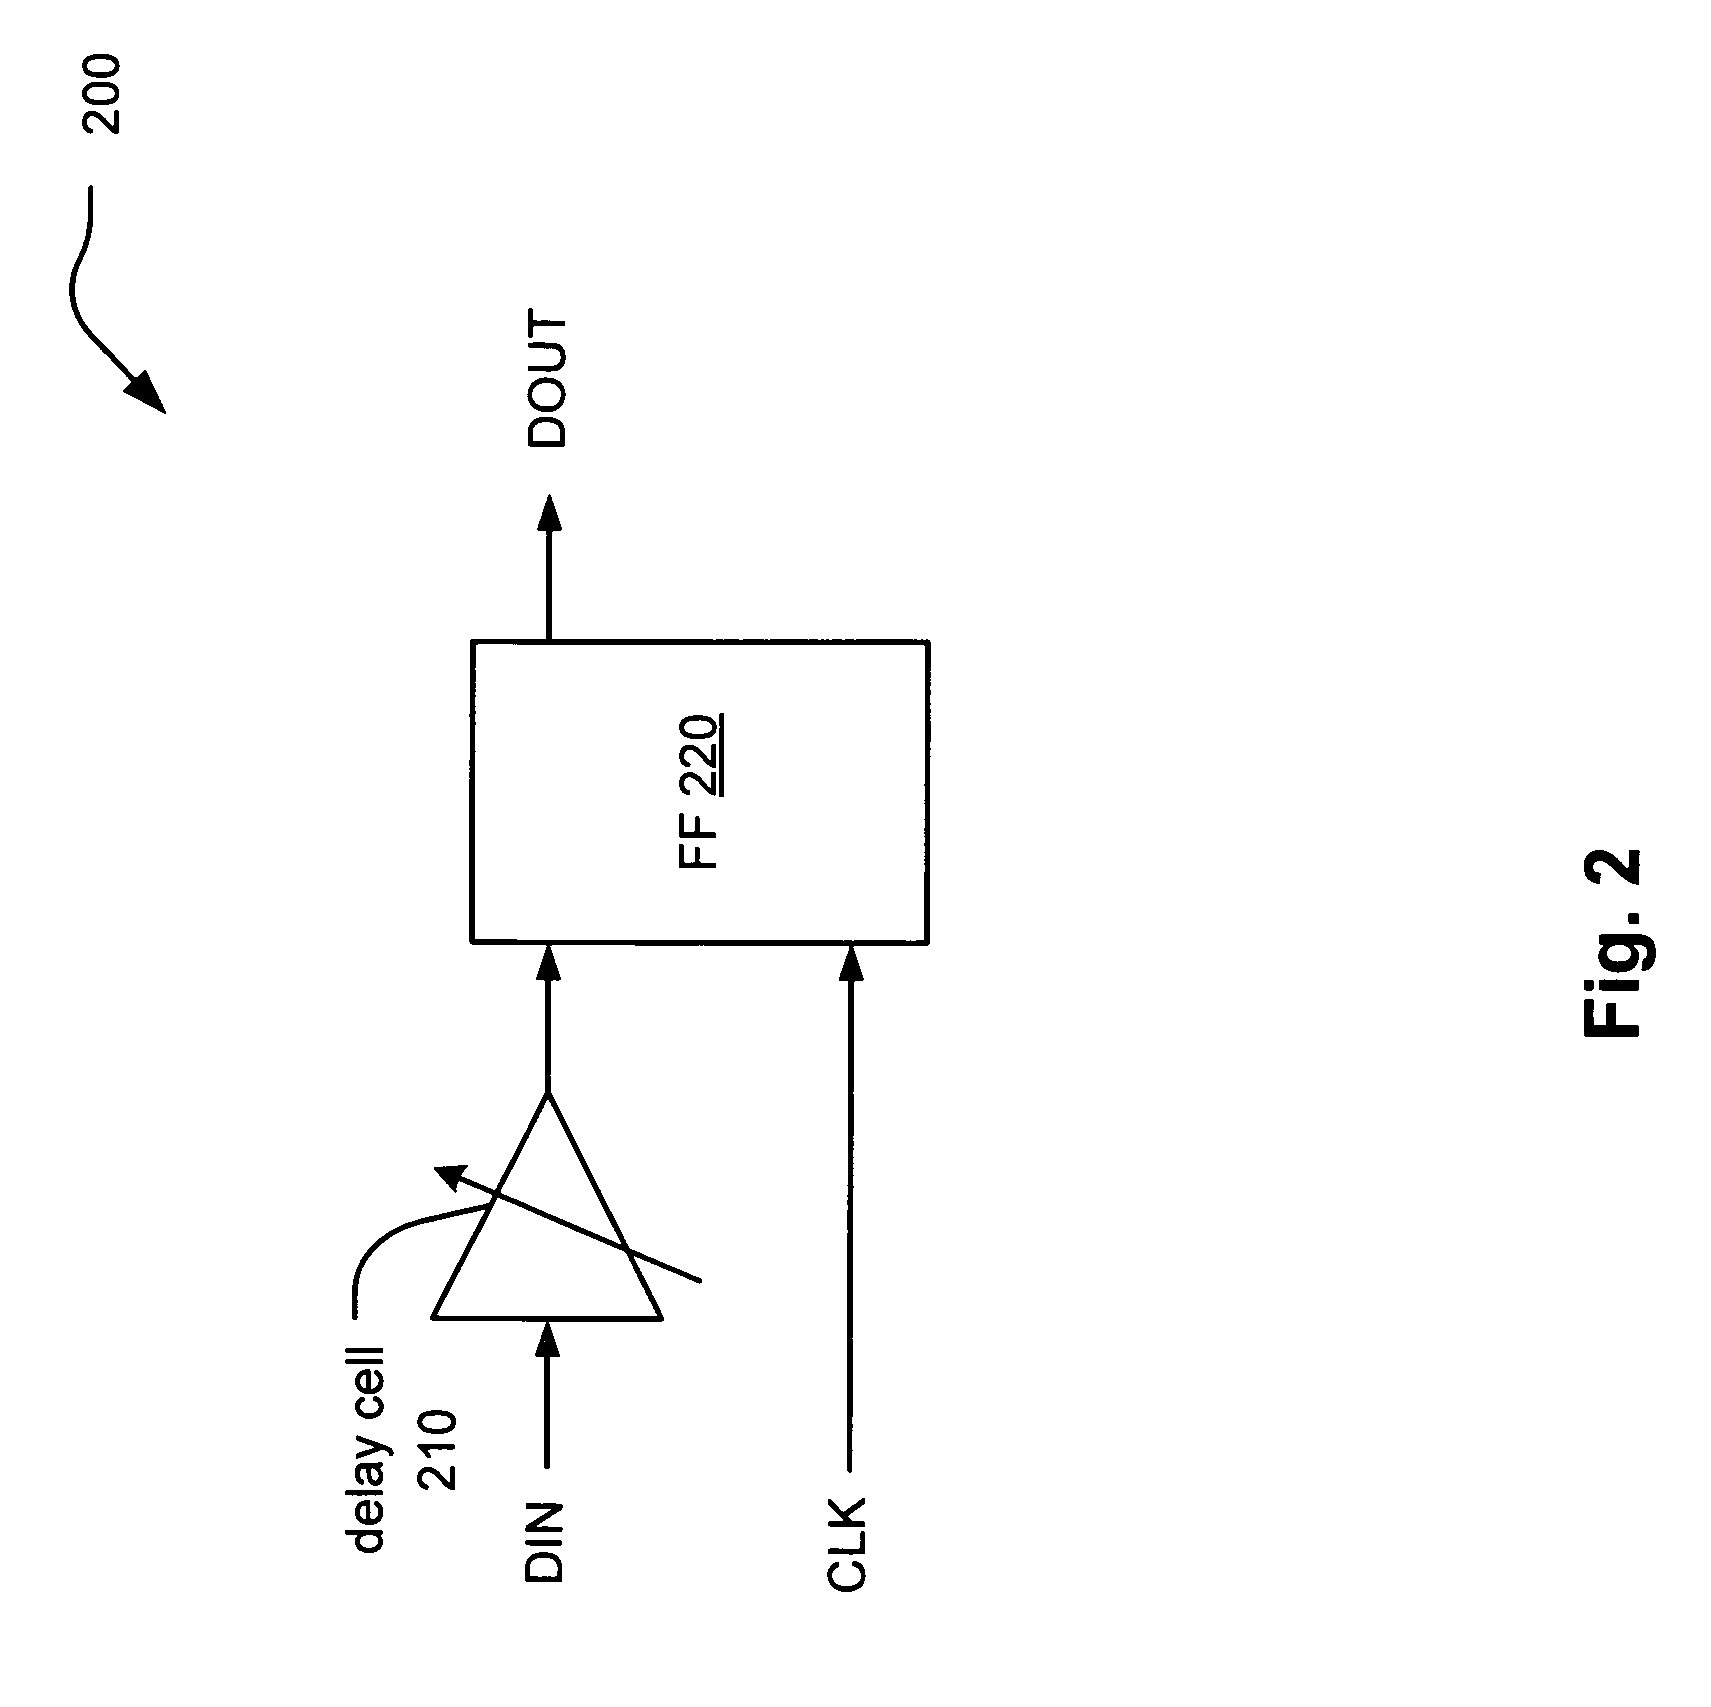 Current-controlled CMOS (C3MOS) fully differential integrated delay cell with variable delay and high bandwidth